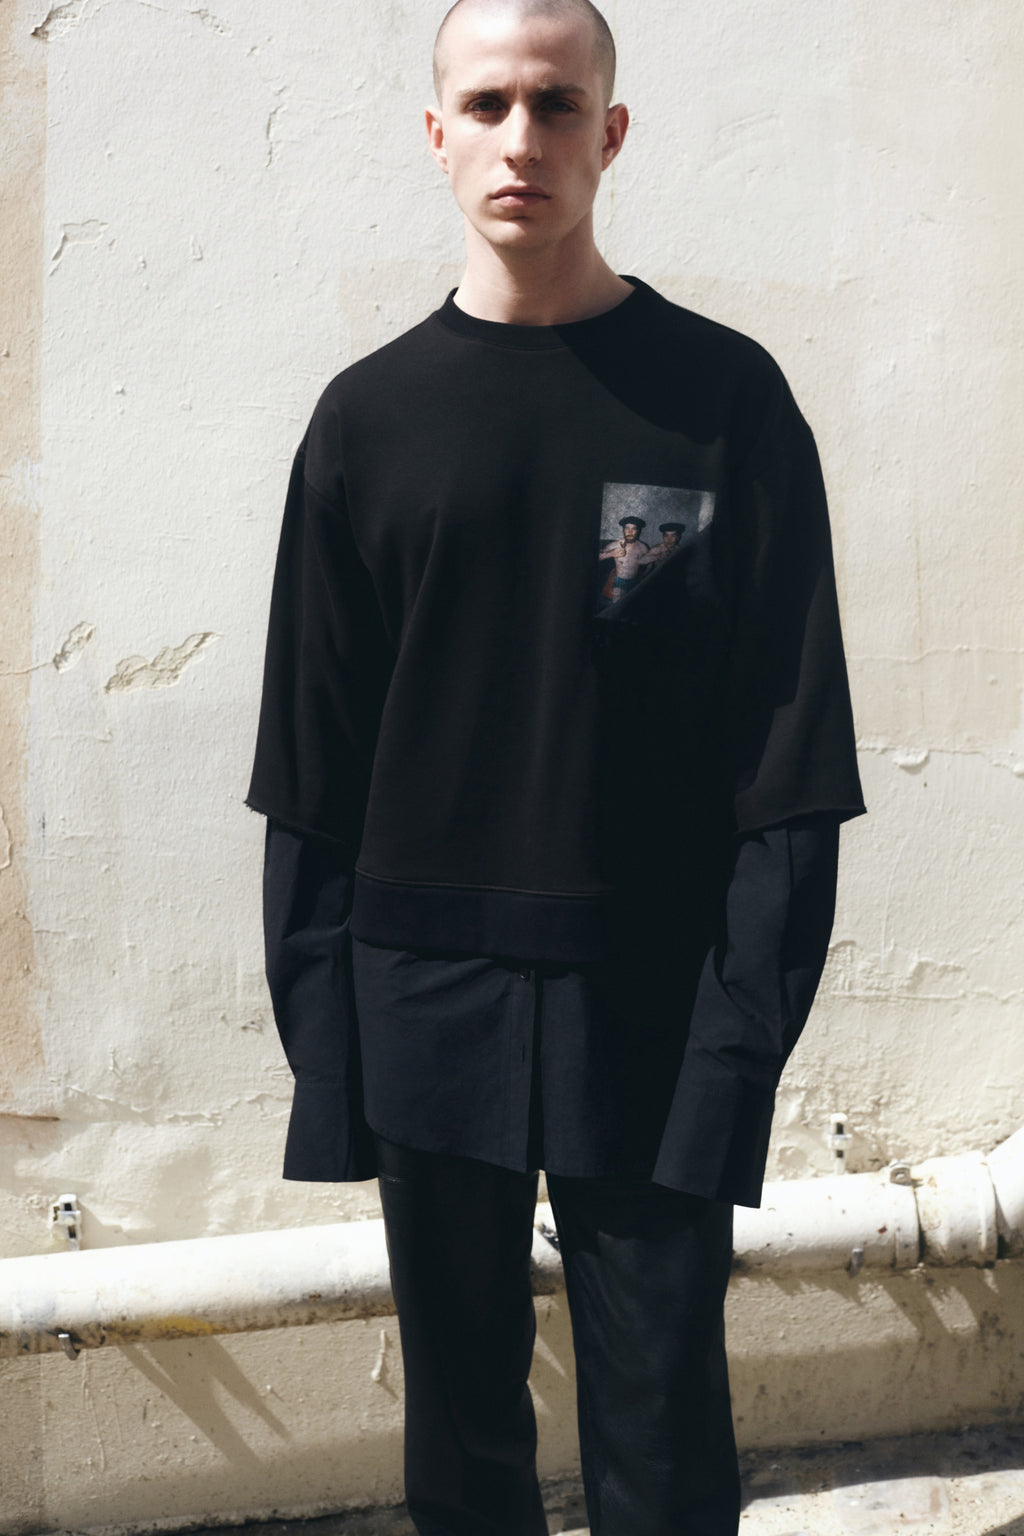 Double-Layered Sweatshirt - SOLD OUT